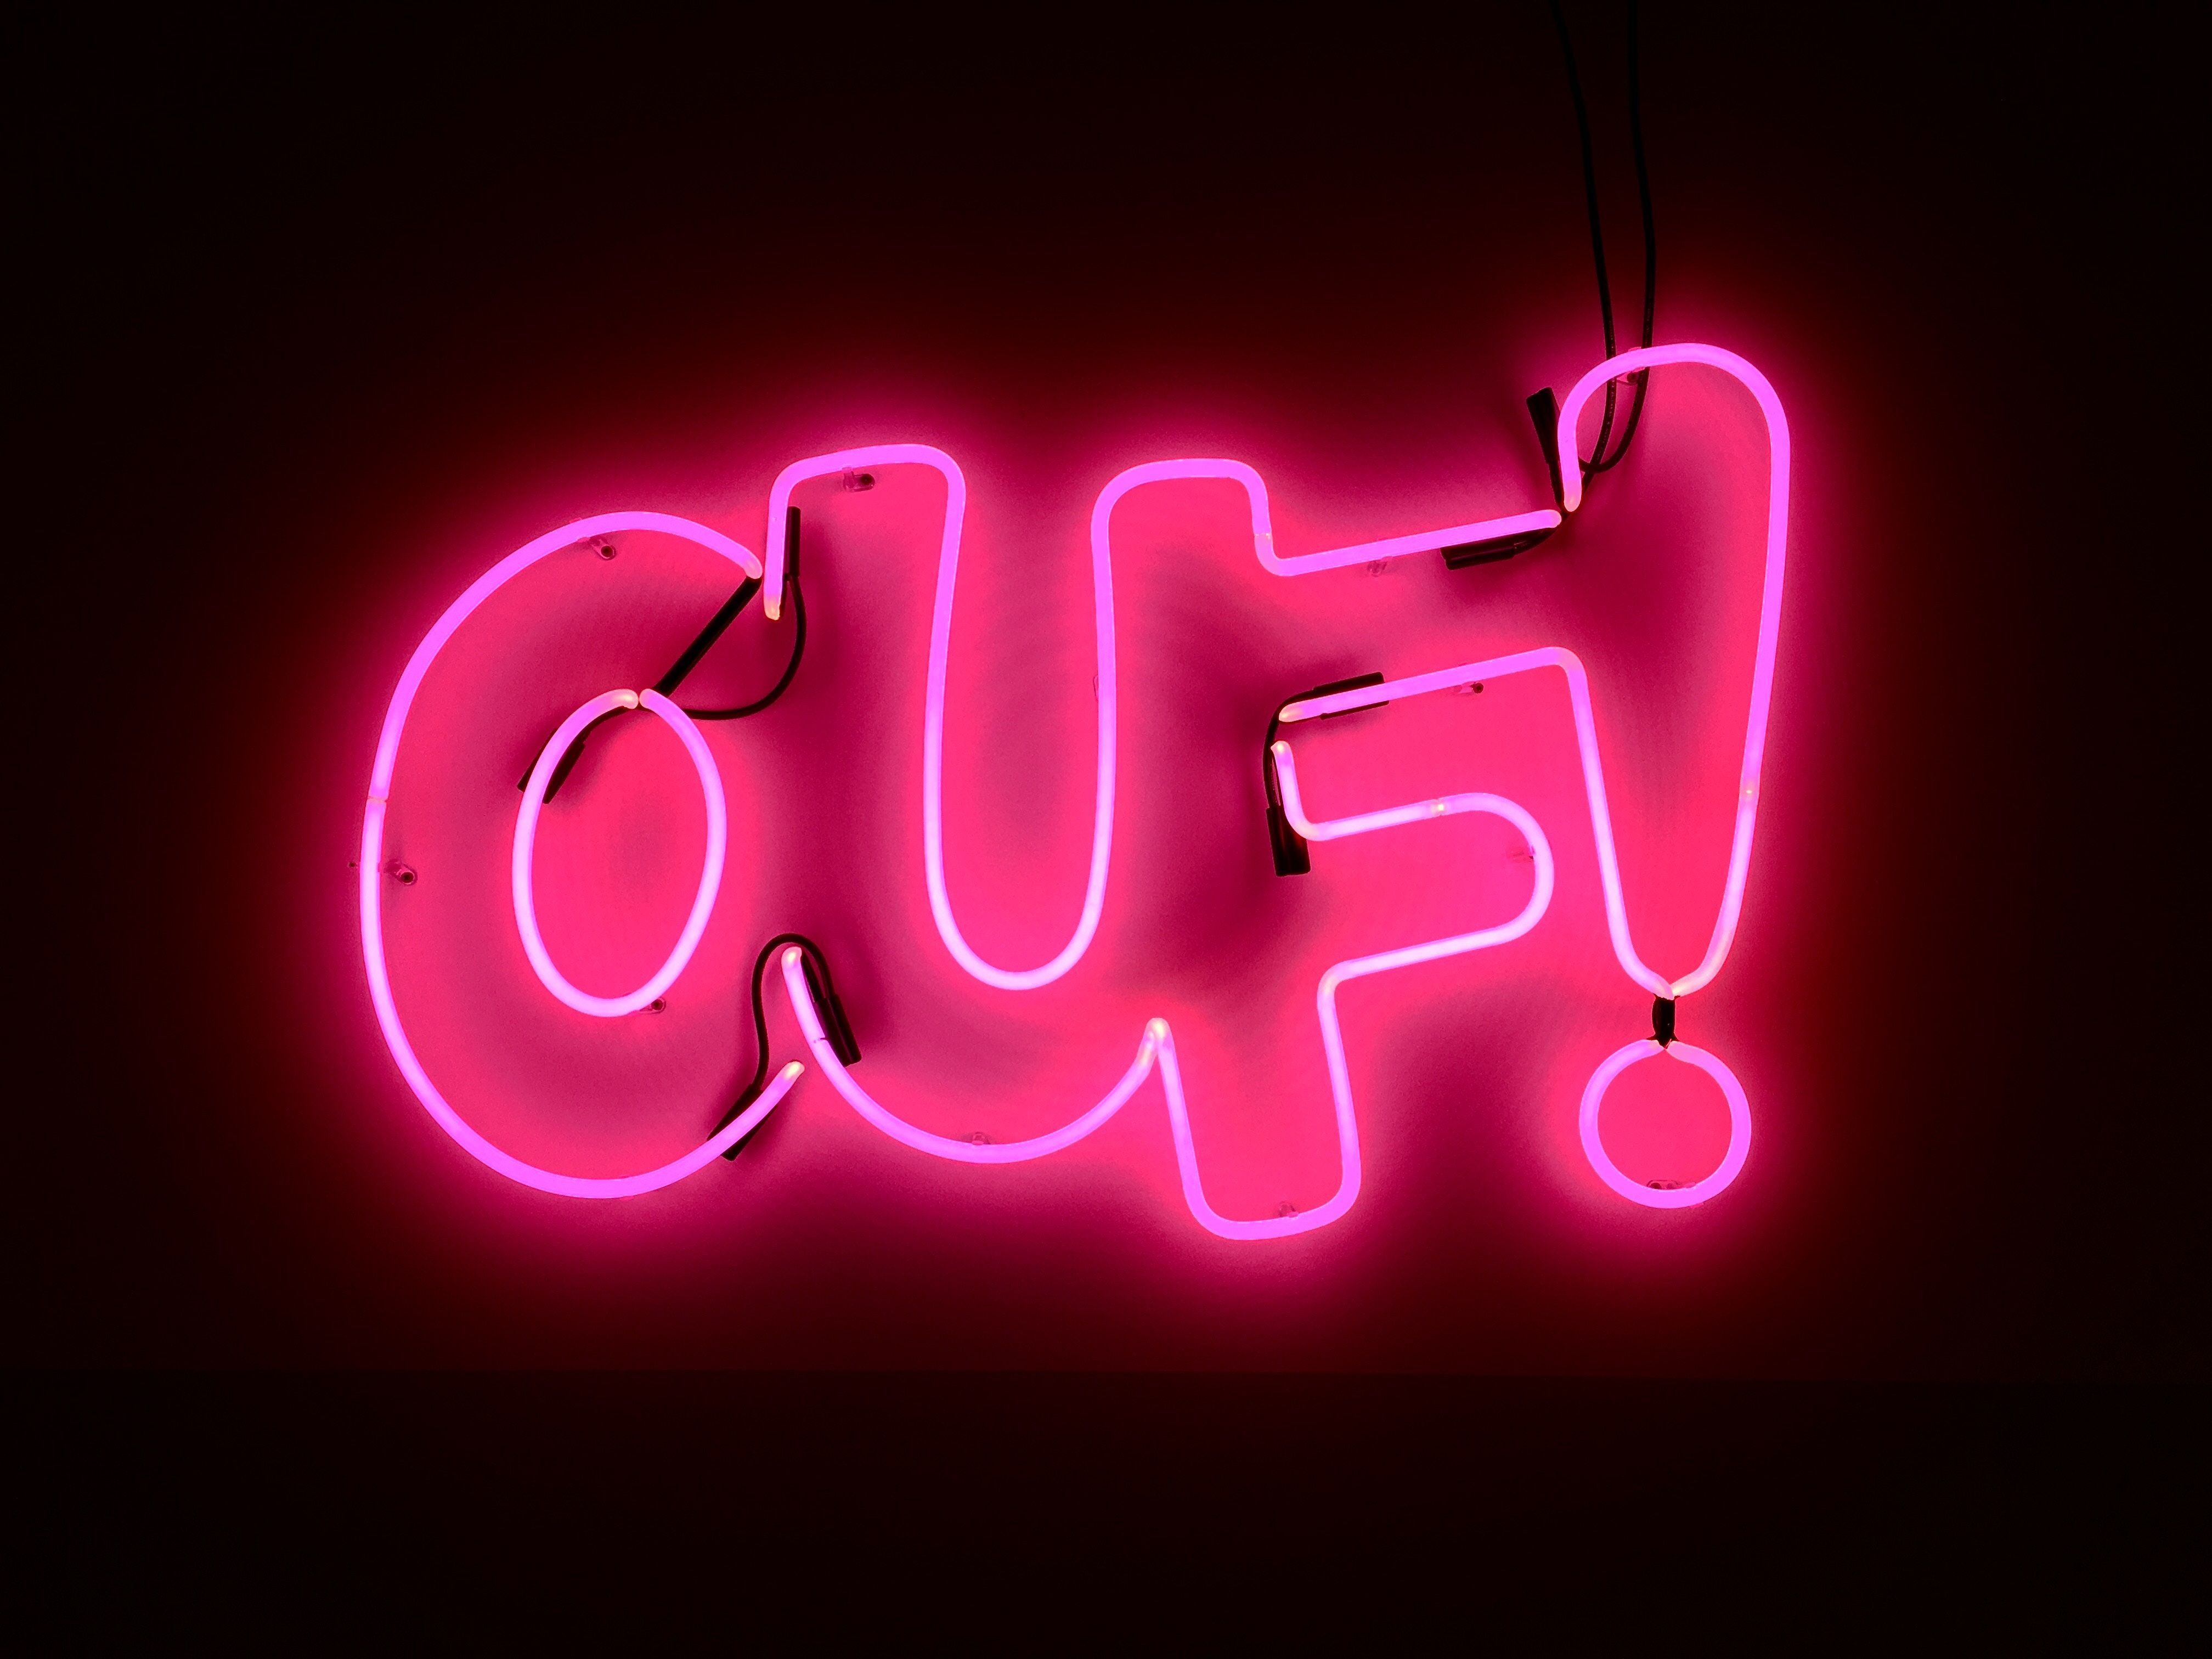 4032x3024 #fou, #neon, #dark, #verlan, #electric, #text, #light, # glow, #club, #funny background, #pink, #Public domain image, #funny wallpaper, #black background, #exclaim, #fluo, #bright, #contrast, #ouf, # wallpaper, #sign. Mocah HD